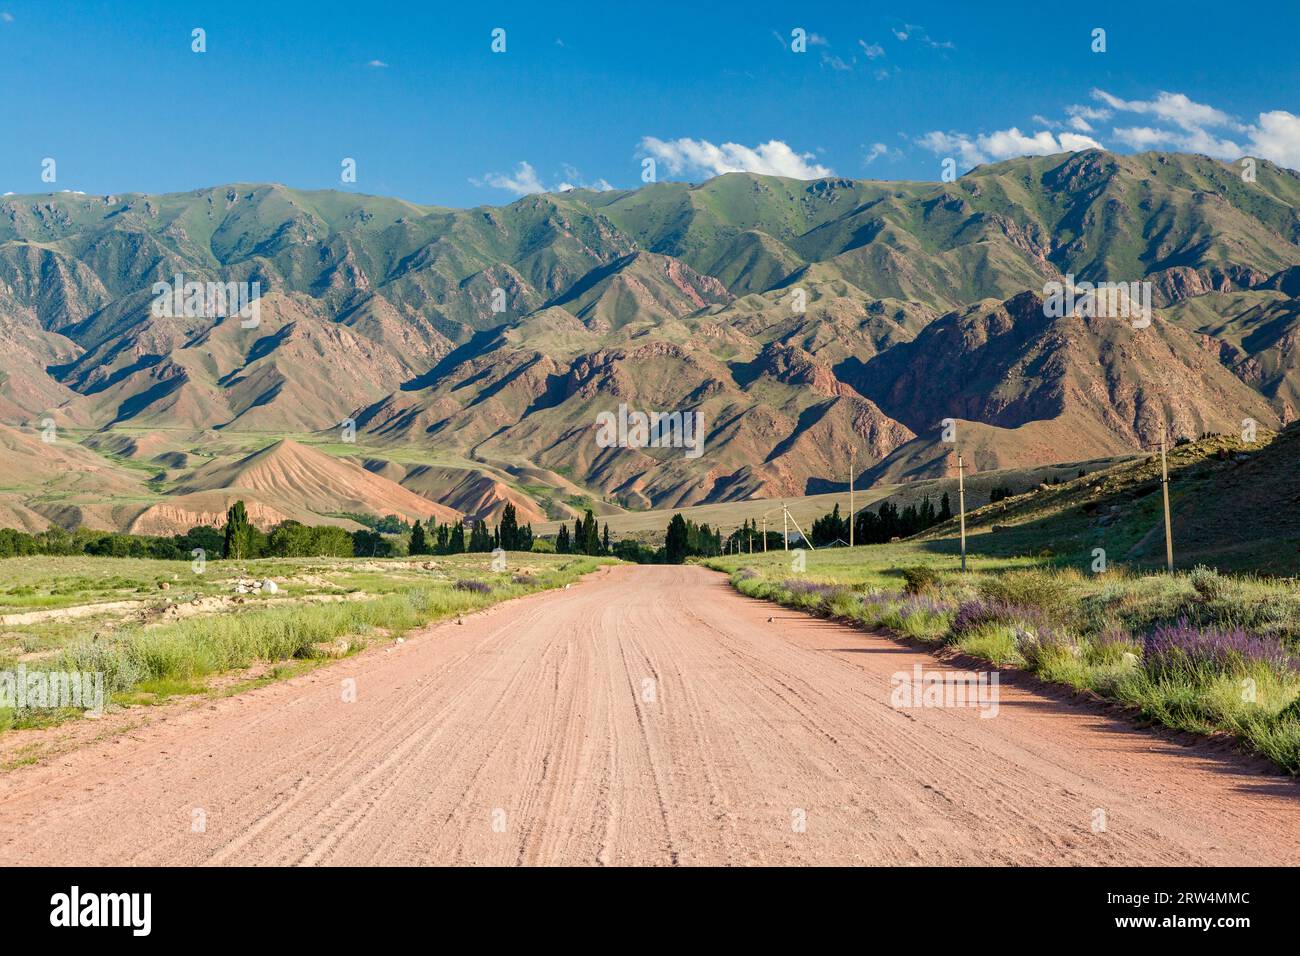 Wide country road in Tien Shan mountains, Kyrgyzstan Stock Photo